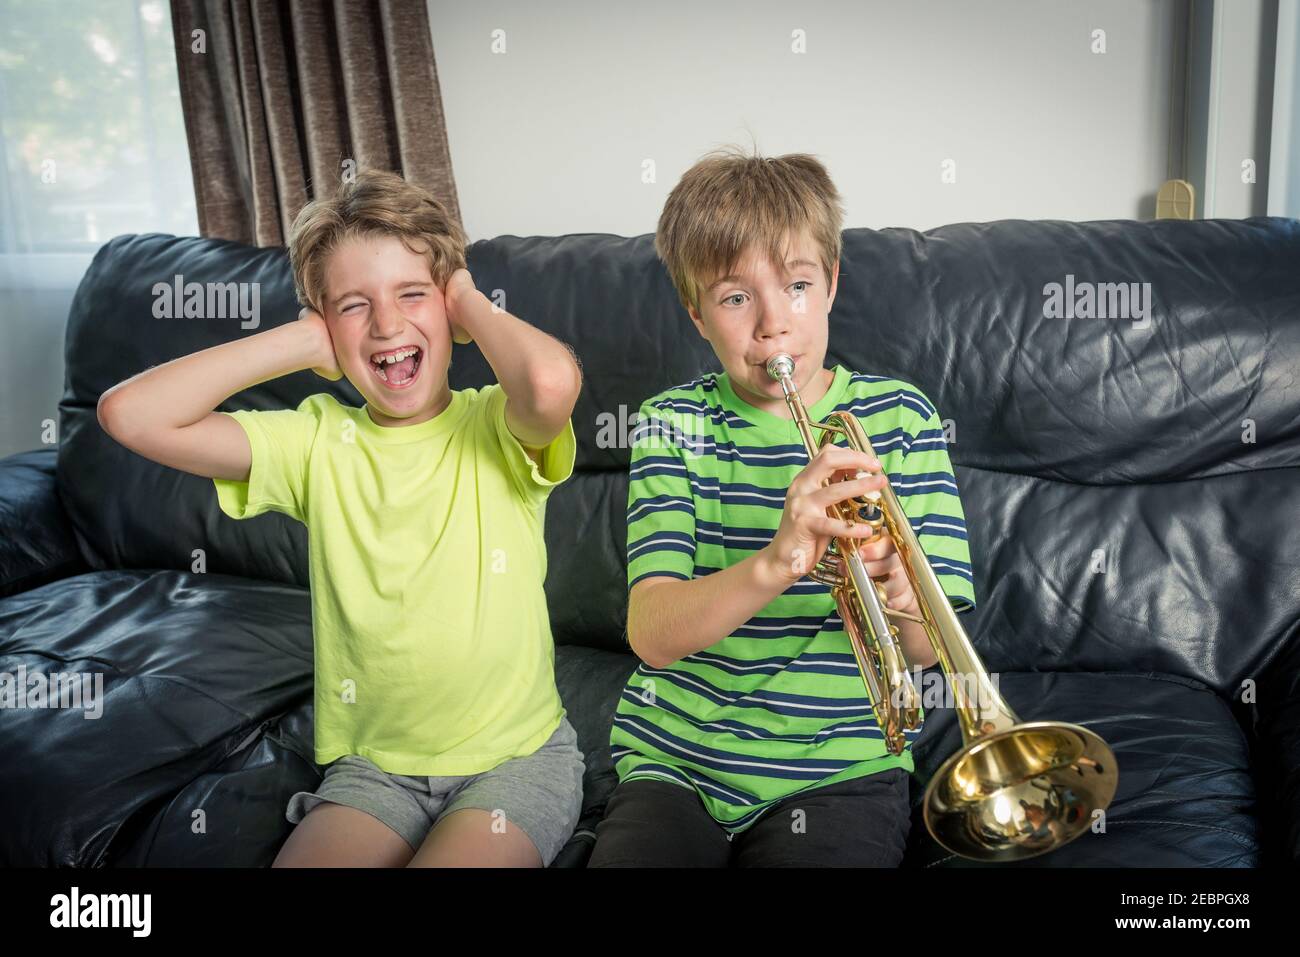 Two kids sitting on a sofa. One is playing a trumpet and the other child annoyed is covering his ears with his hands Stock Photo